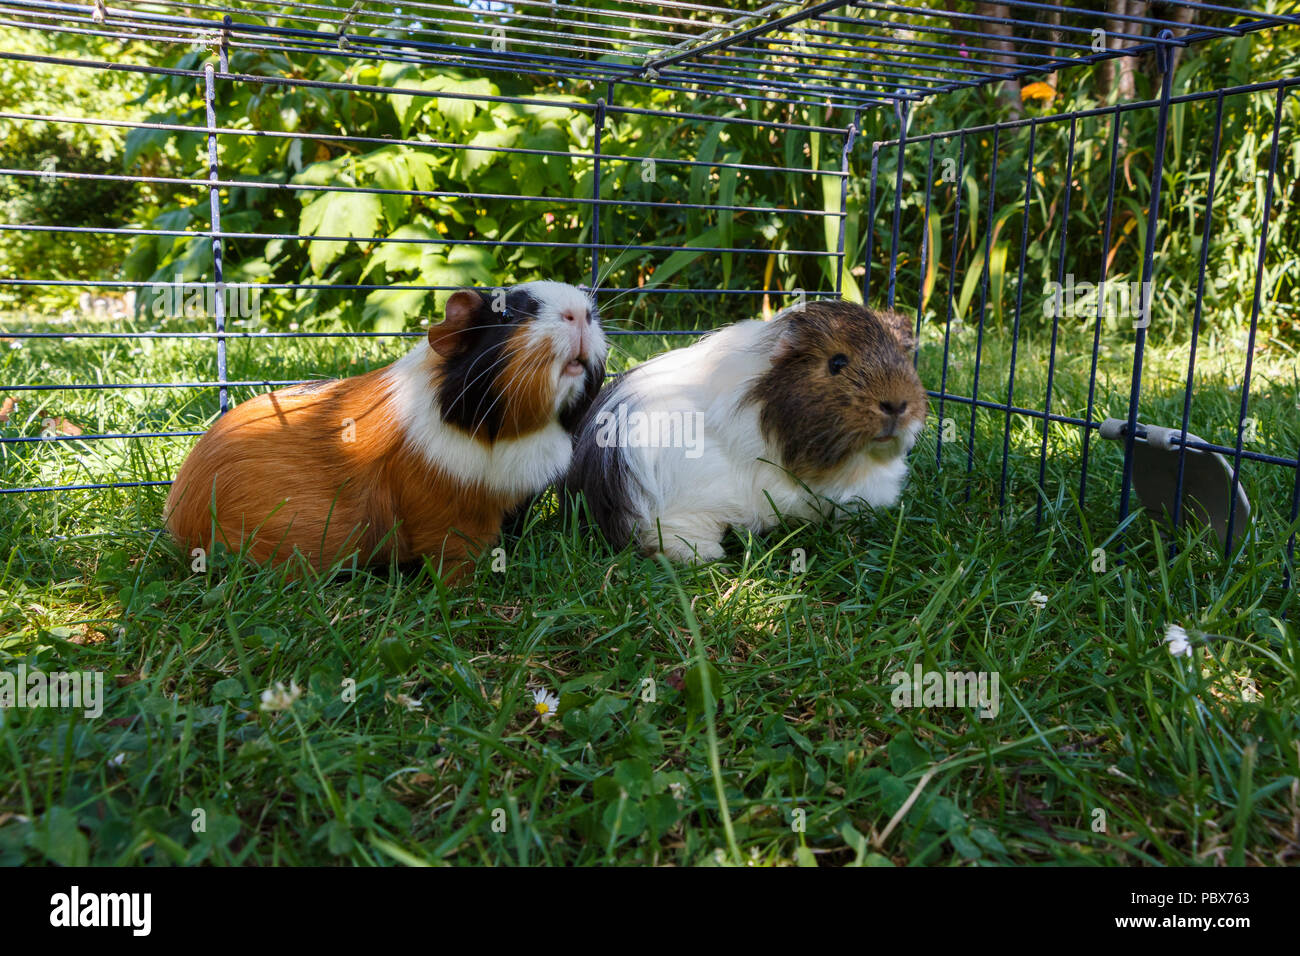 Two guinea pigs under a wire fencng in grass in a garden Stock Photo